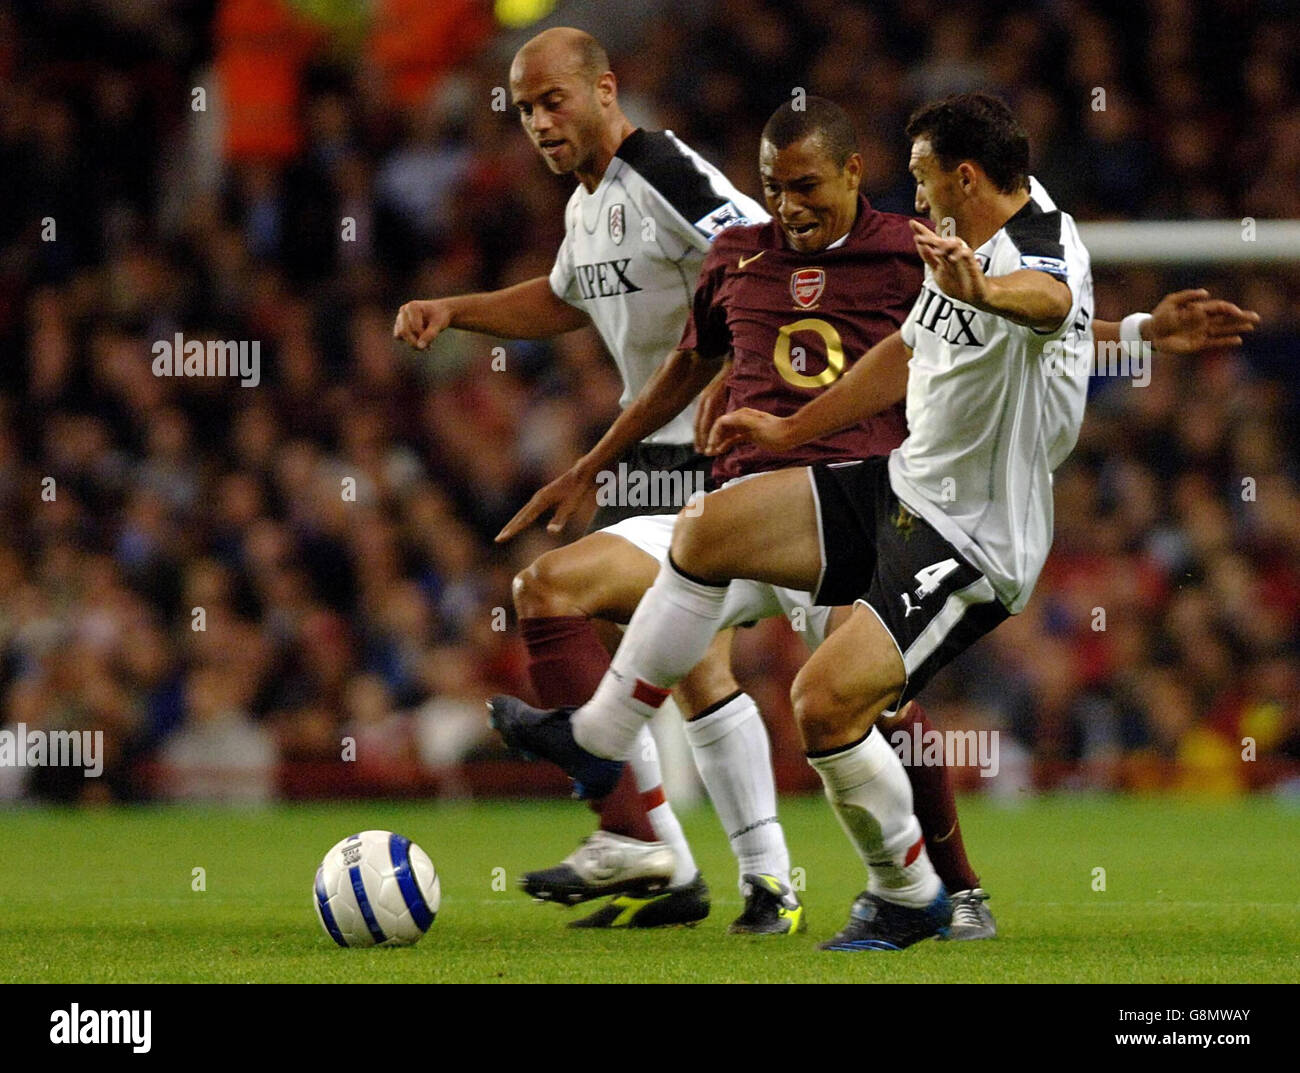 Arsenal's Ashley Cole battles for the ball with Fulham's Claus Jensen (L) and Steed Malbranque (R) during the Barclays Premiership match at Highbury, London, Wednesday August 24, 2005. PRESS ASSOCIATION Photo. Photo credit should read: Sean Dempsey/PA Stock Photo